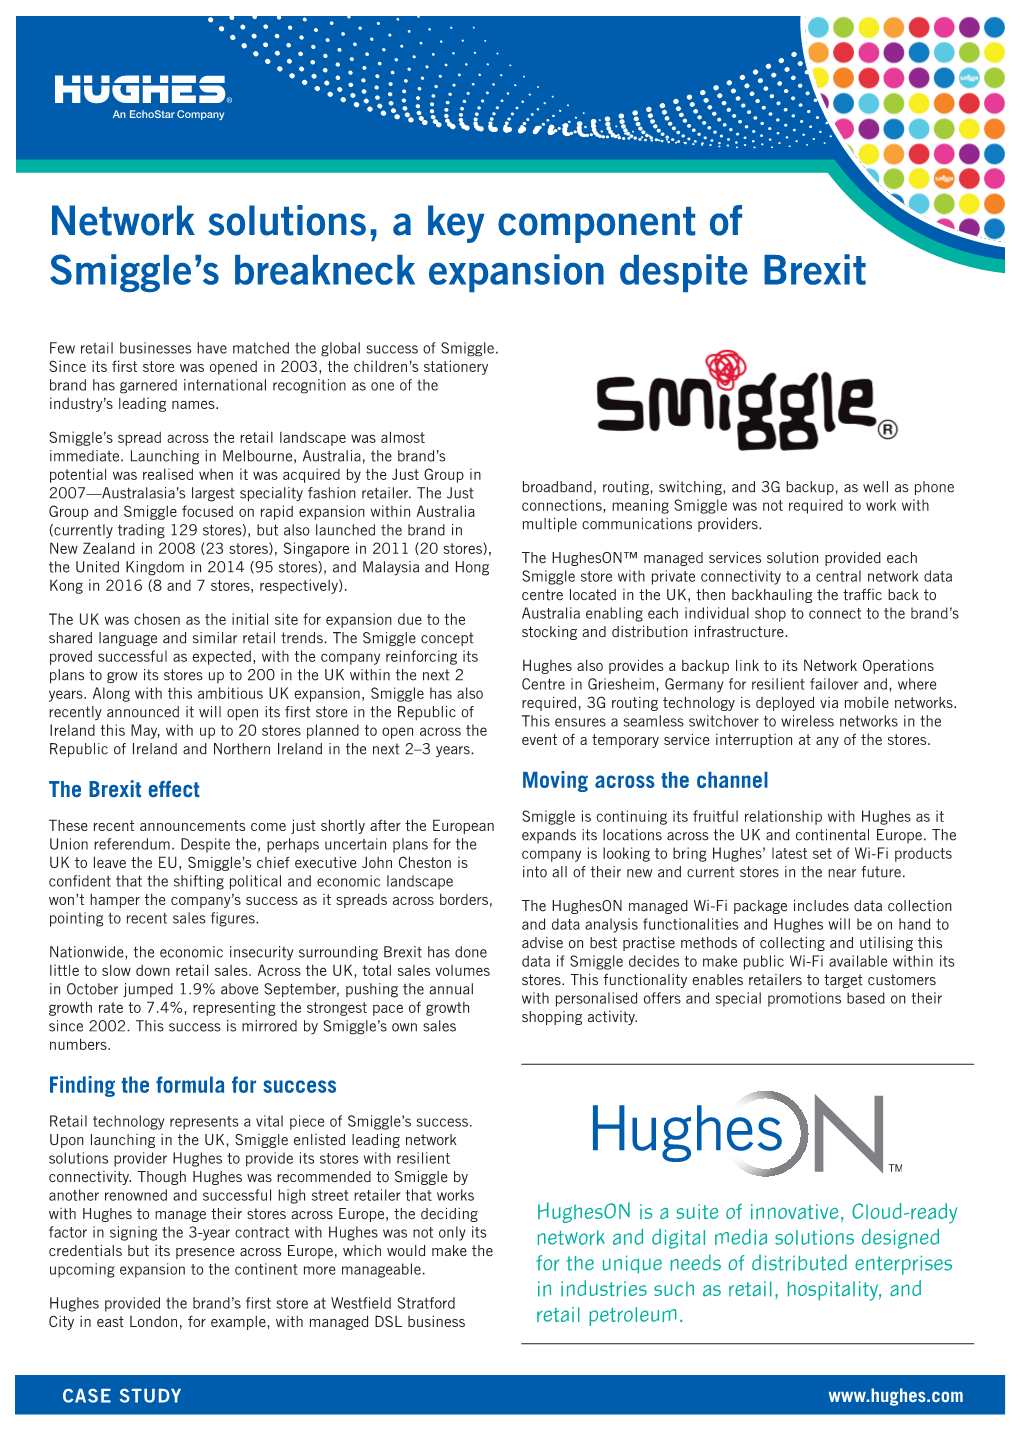 Network Solutions, a Key Component of Smiggle's Breakneck Expansion Despite Brexit